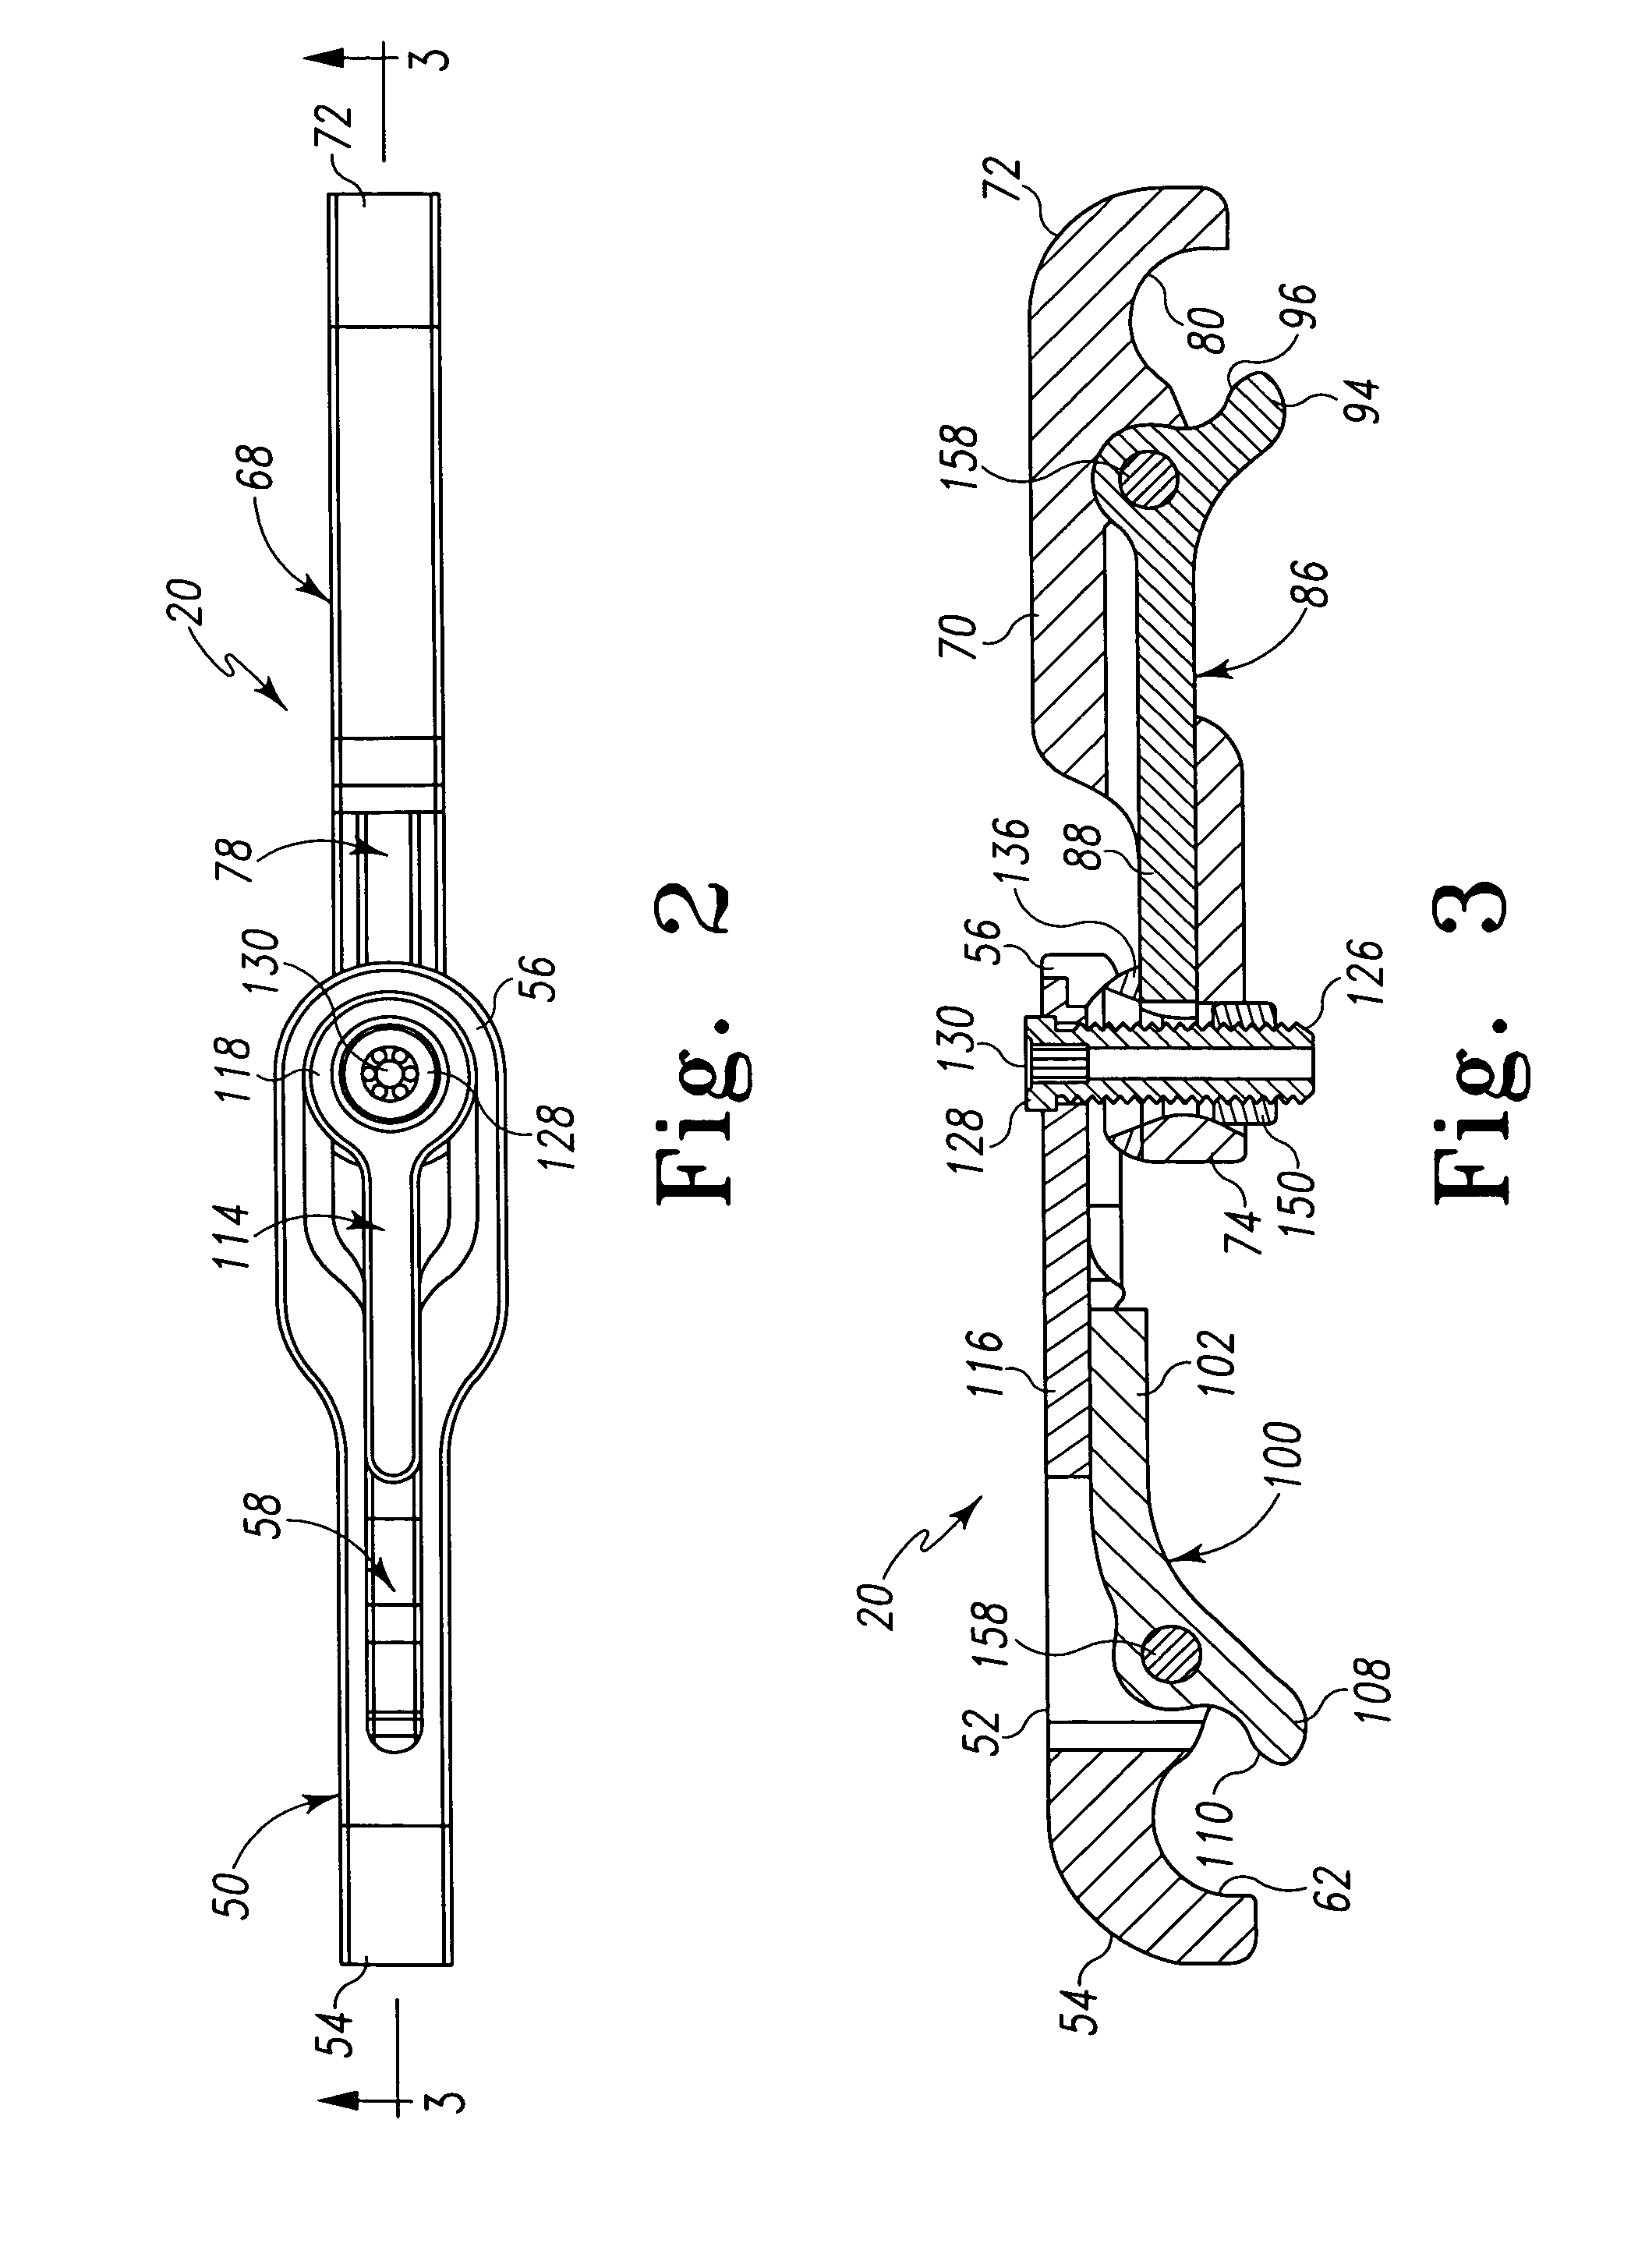 Multi-axial spinal cross-connectors